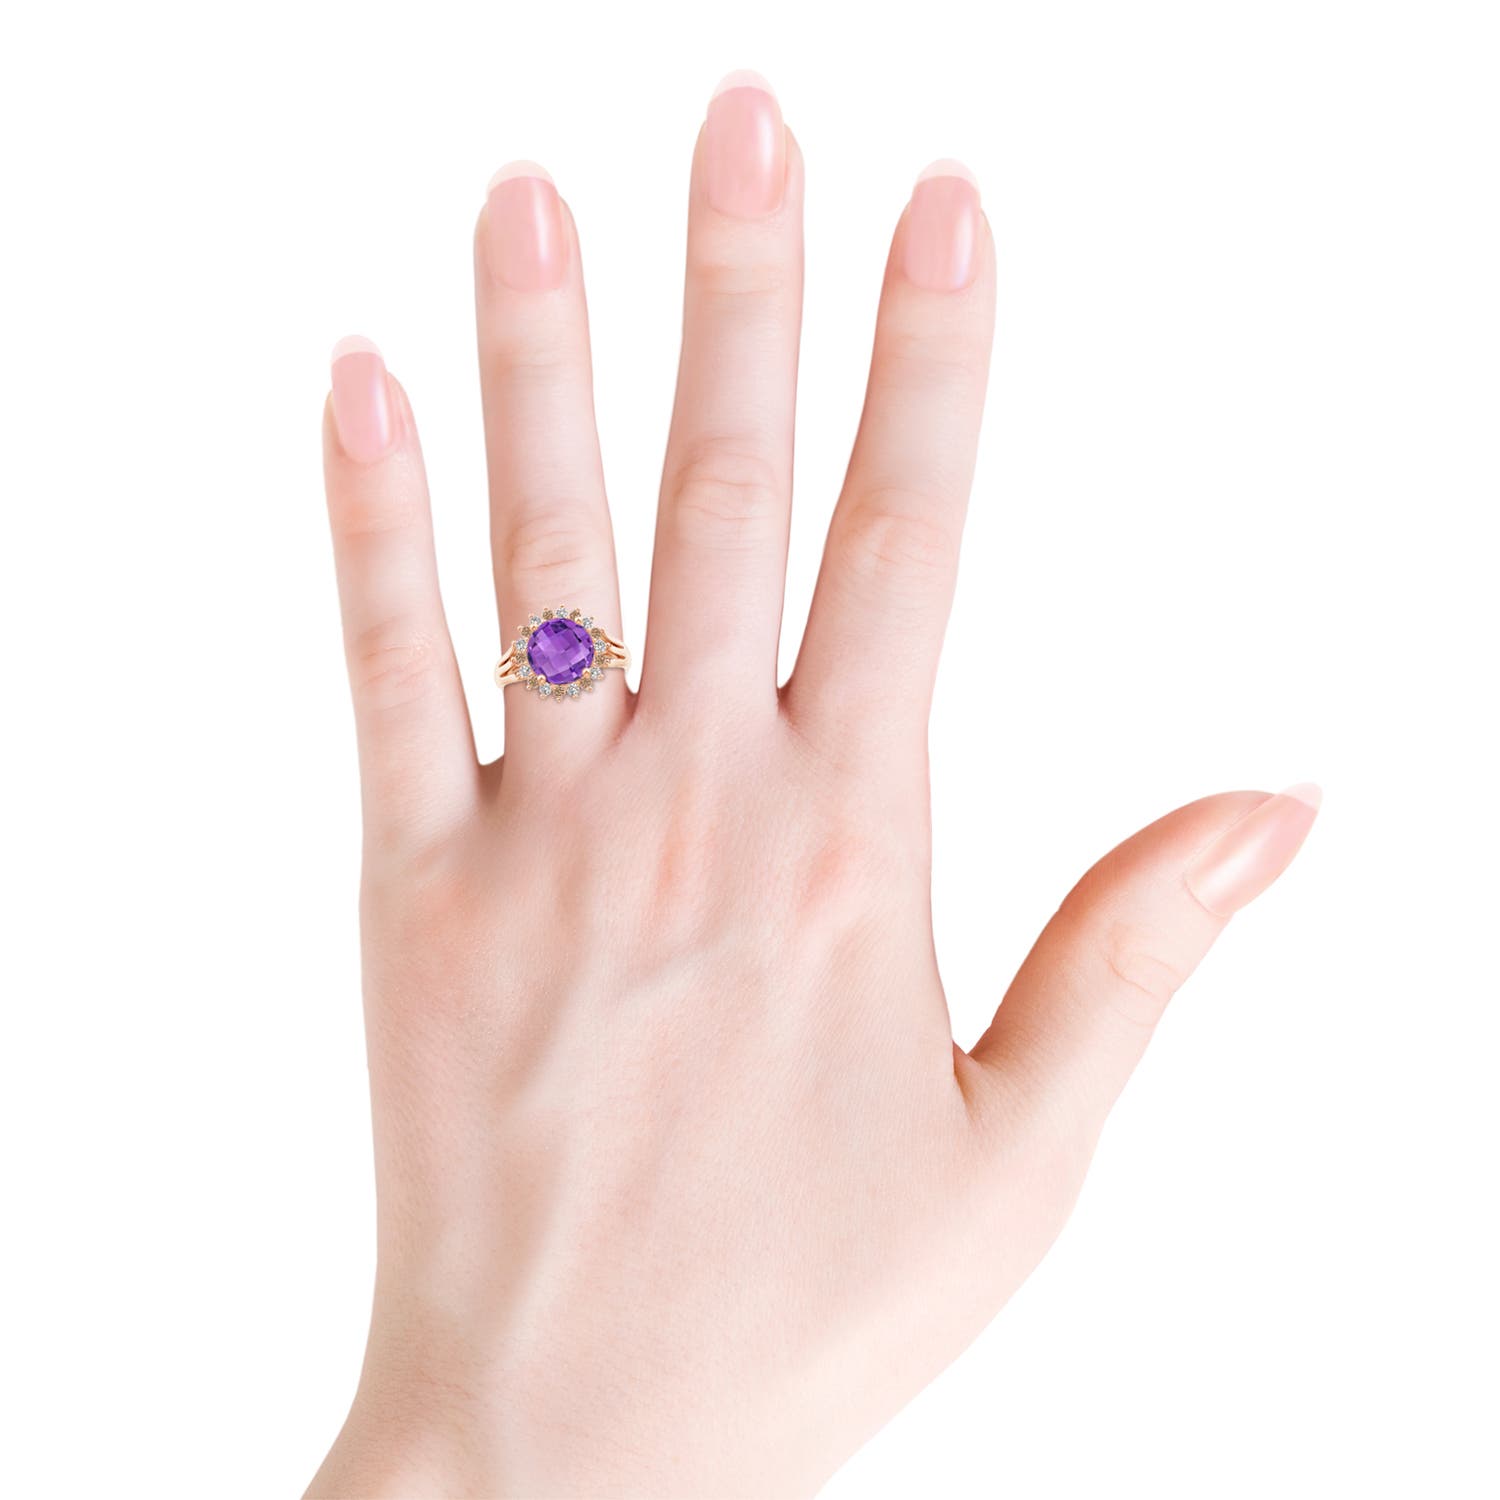 AA - Amethyst / 3 CT / 14 KT Rose Gold